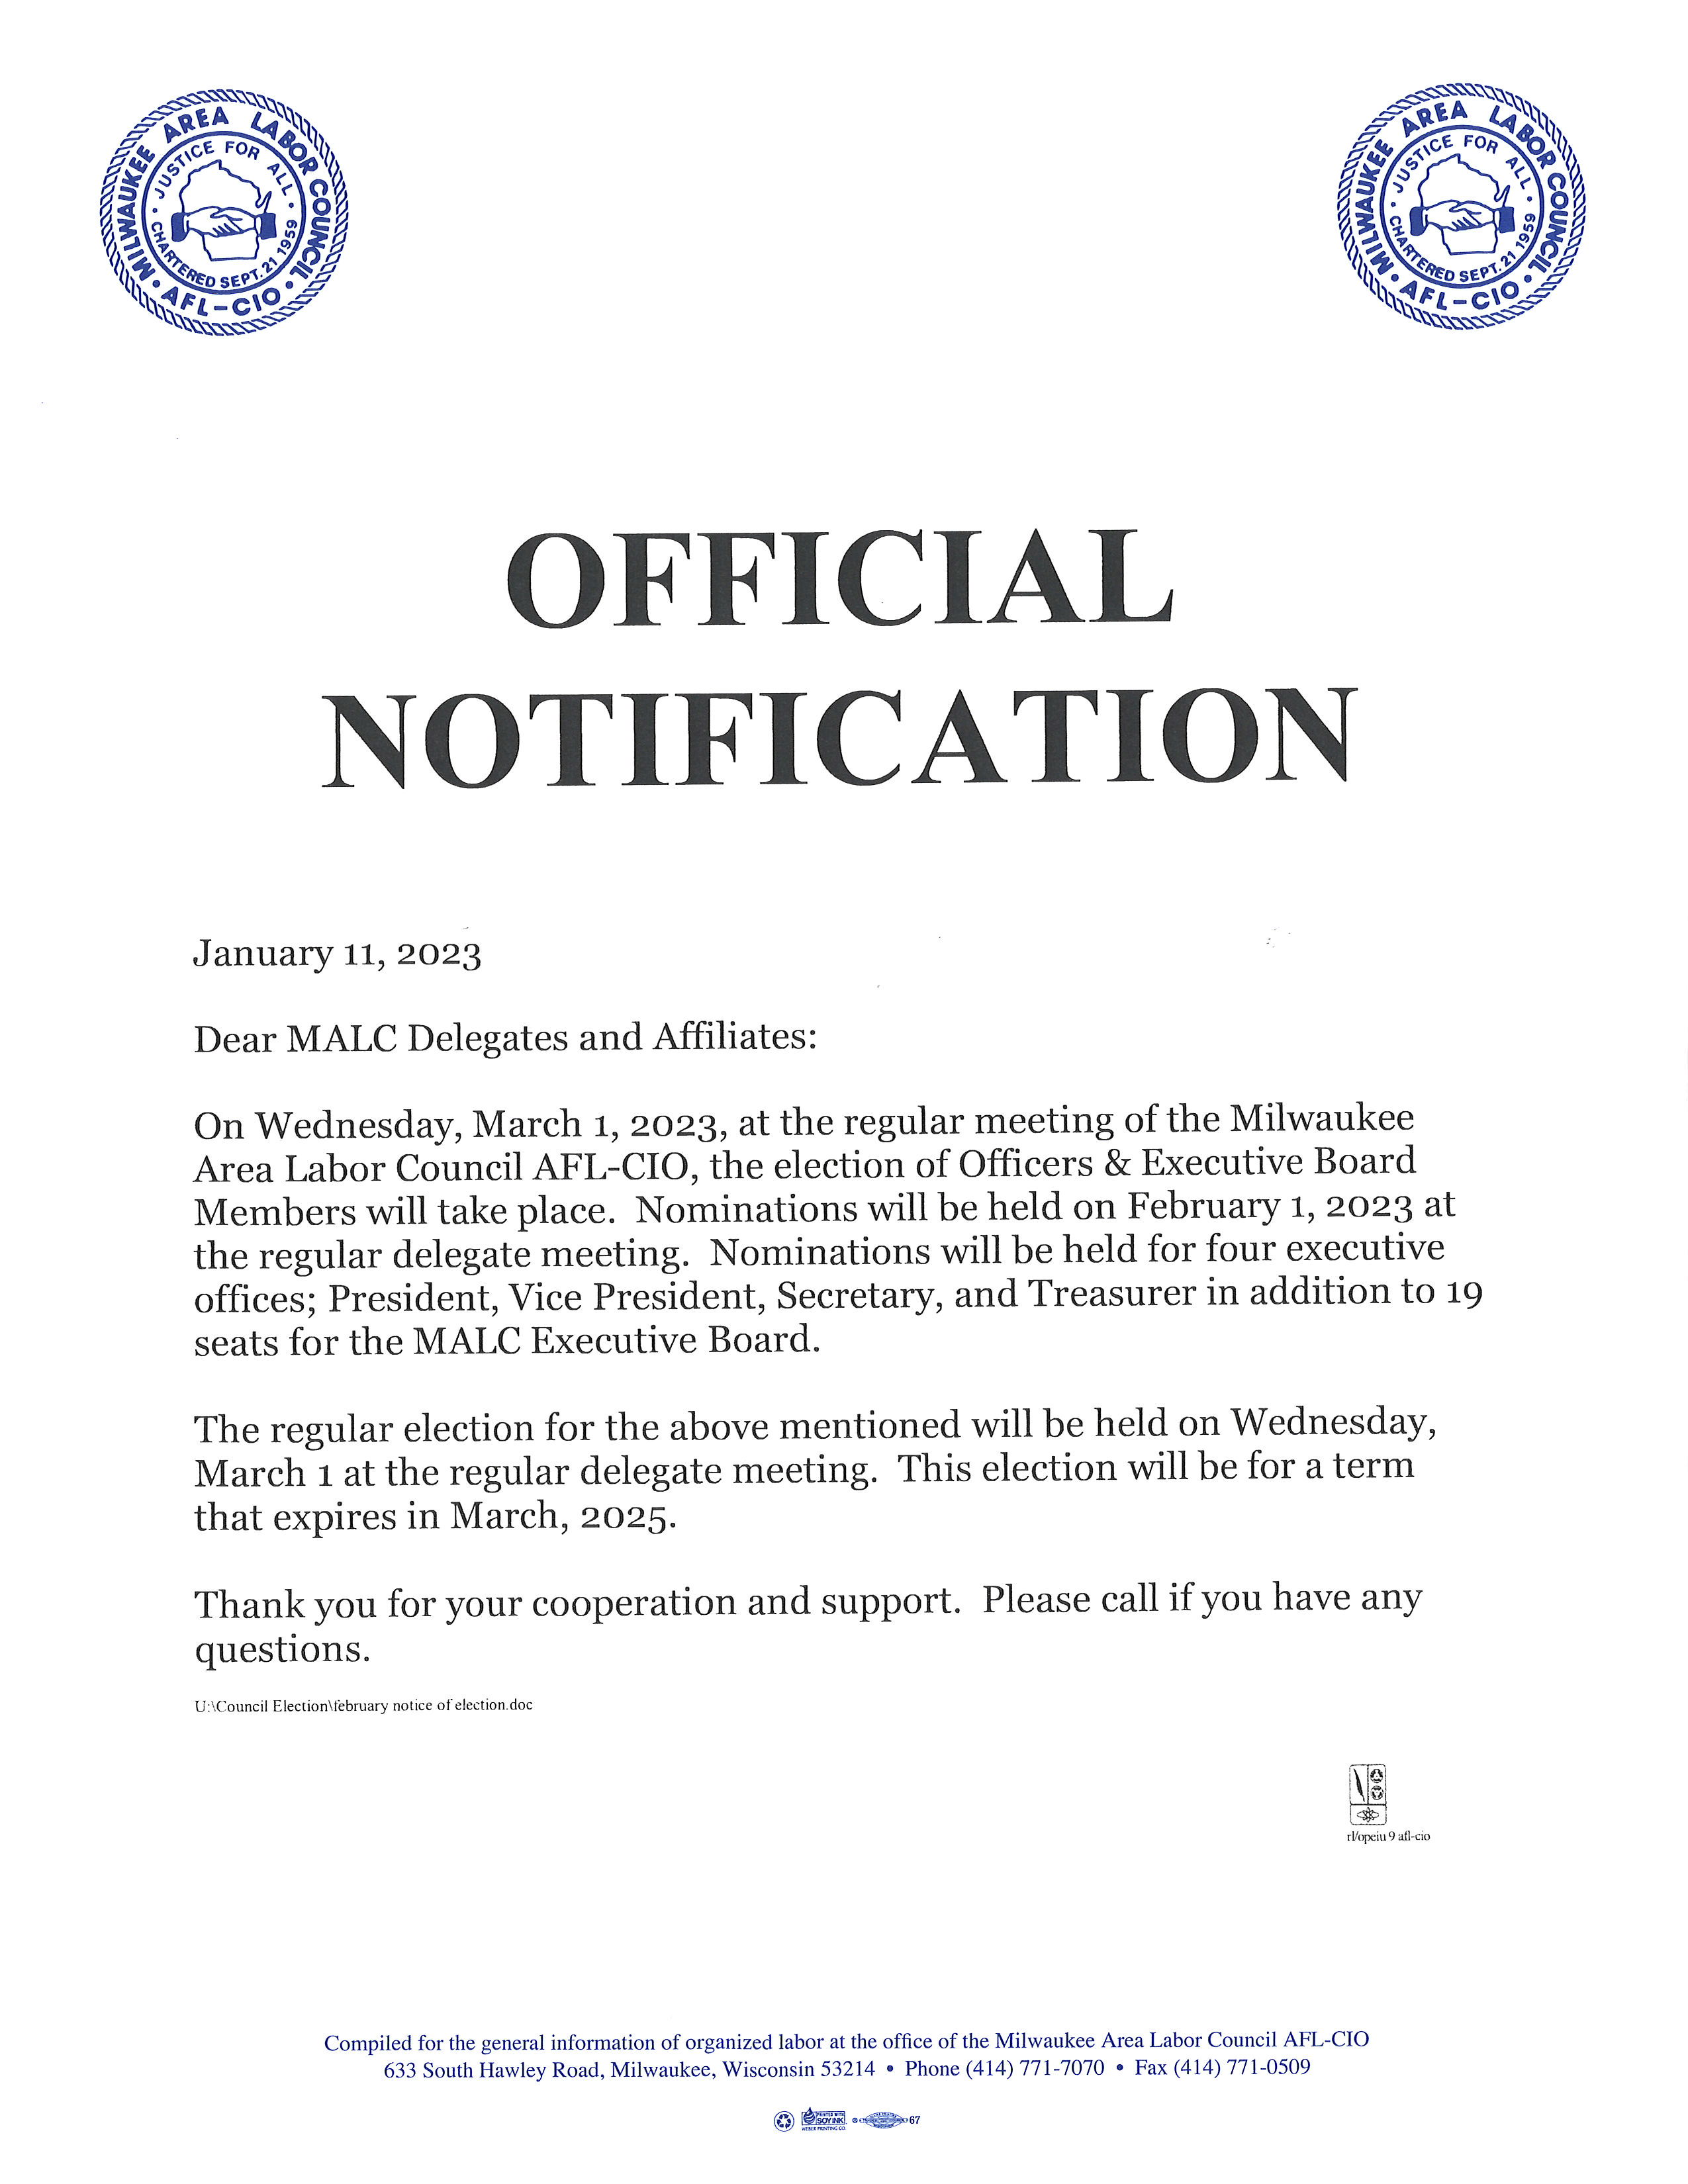 Official Notification- MALC Elections